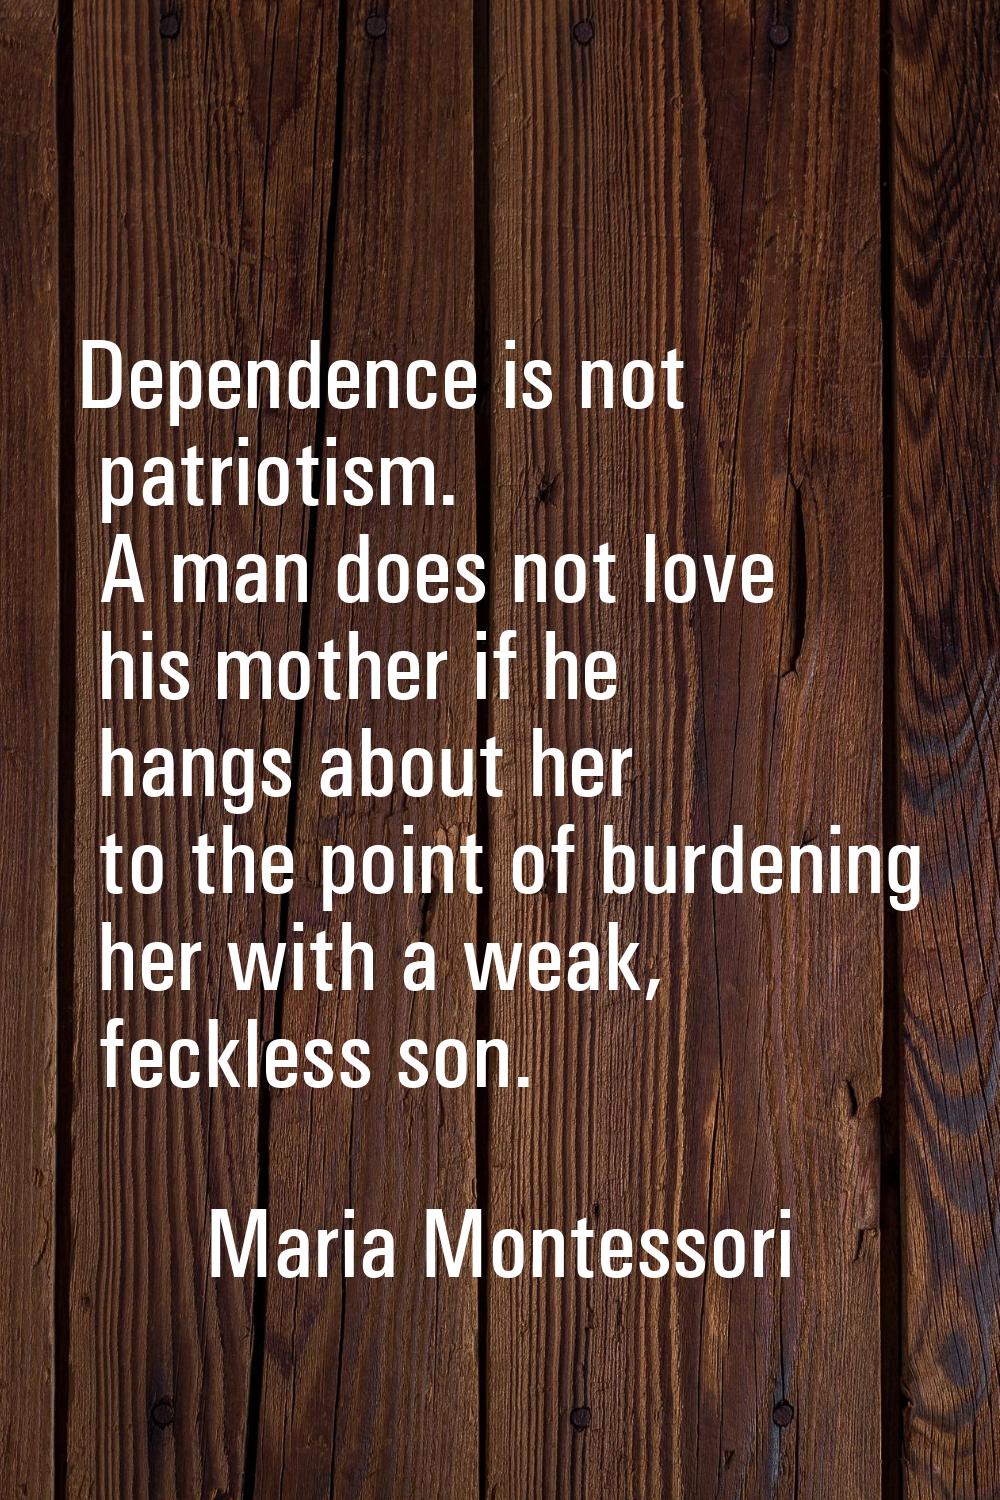 Dependence is not patriotism. A man does not love his mother if he hangs about her to the point of 